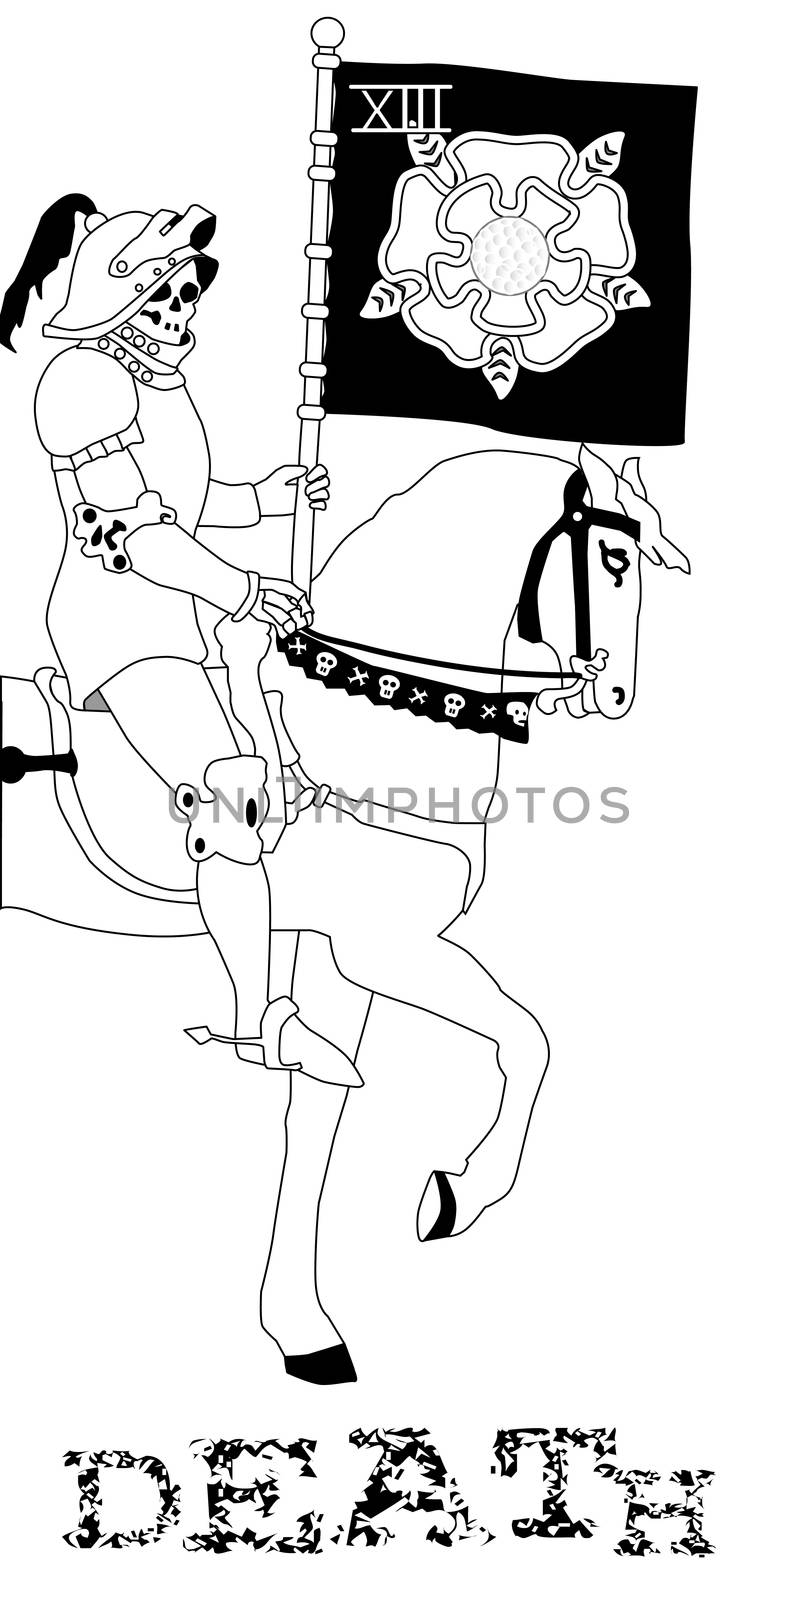 A typical image of Death on horseback as may be depicted on a tarot pack from bygone days.